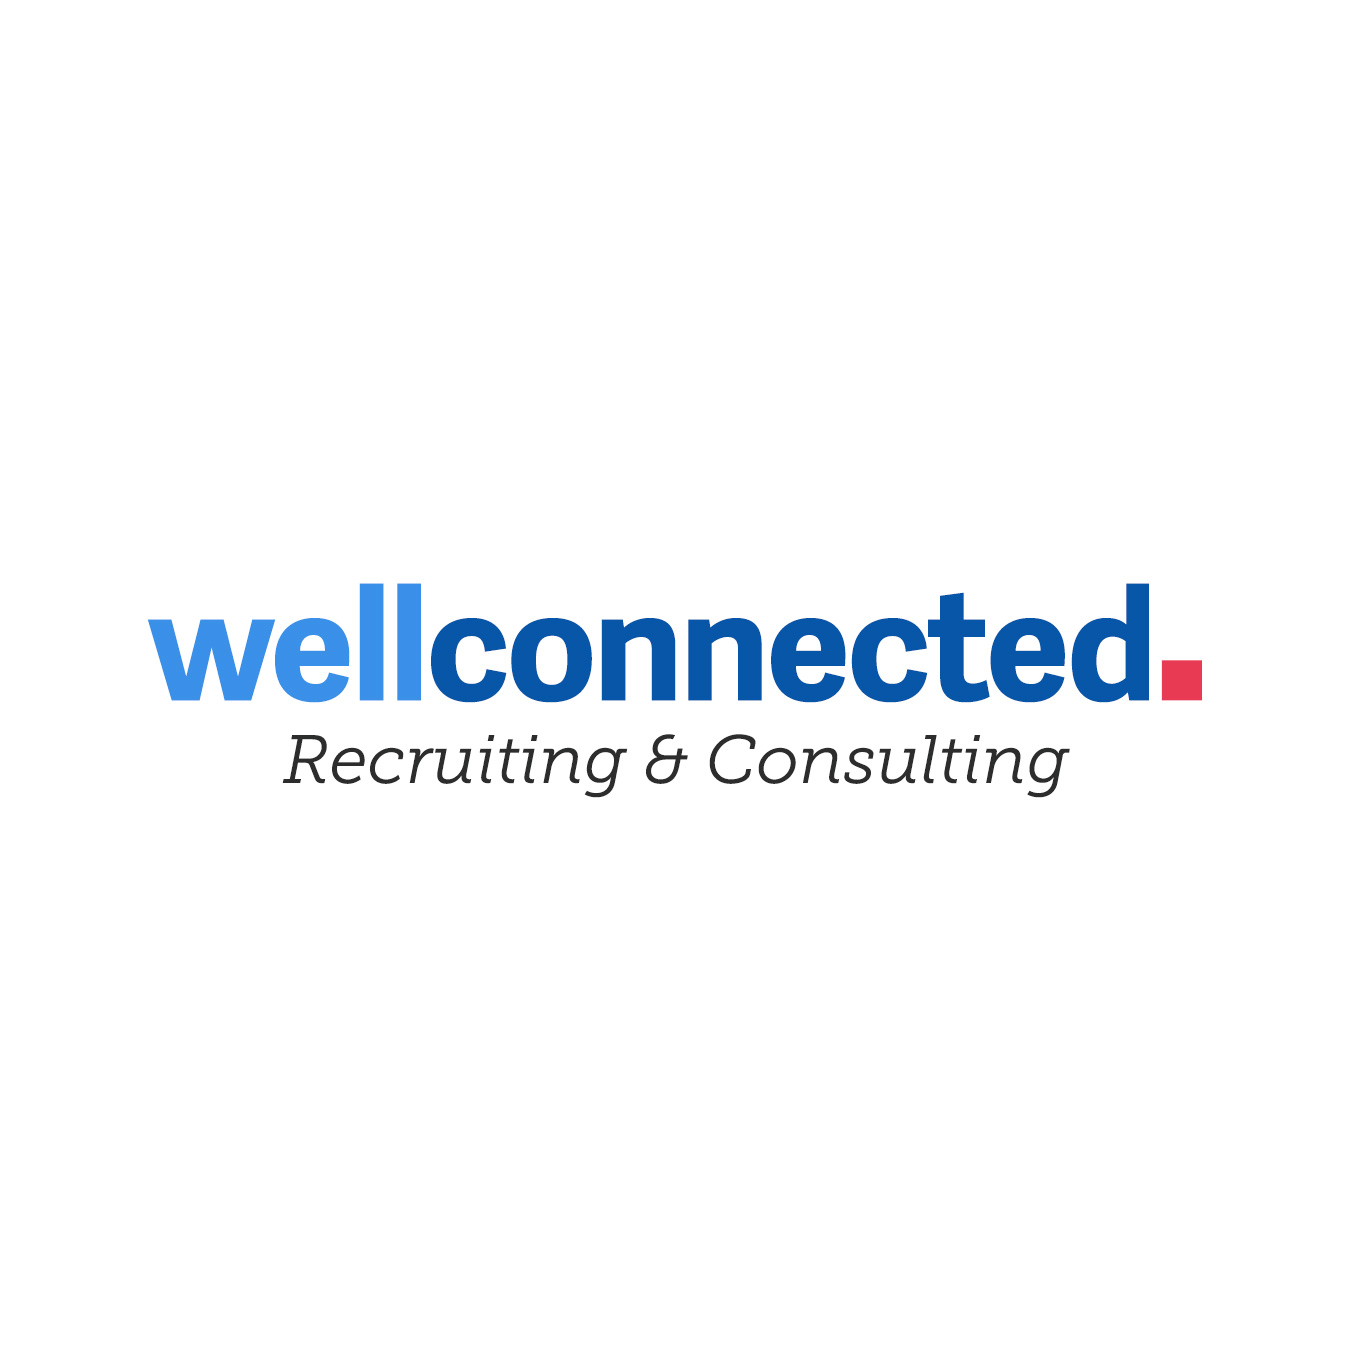 wellconnected - Recruiting & Consulting